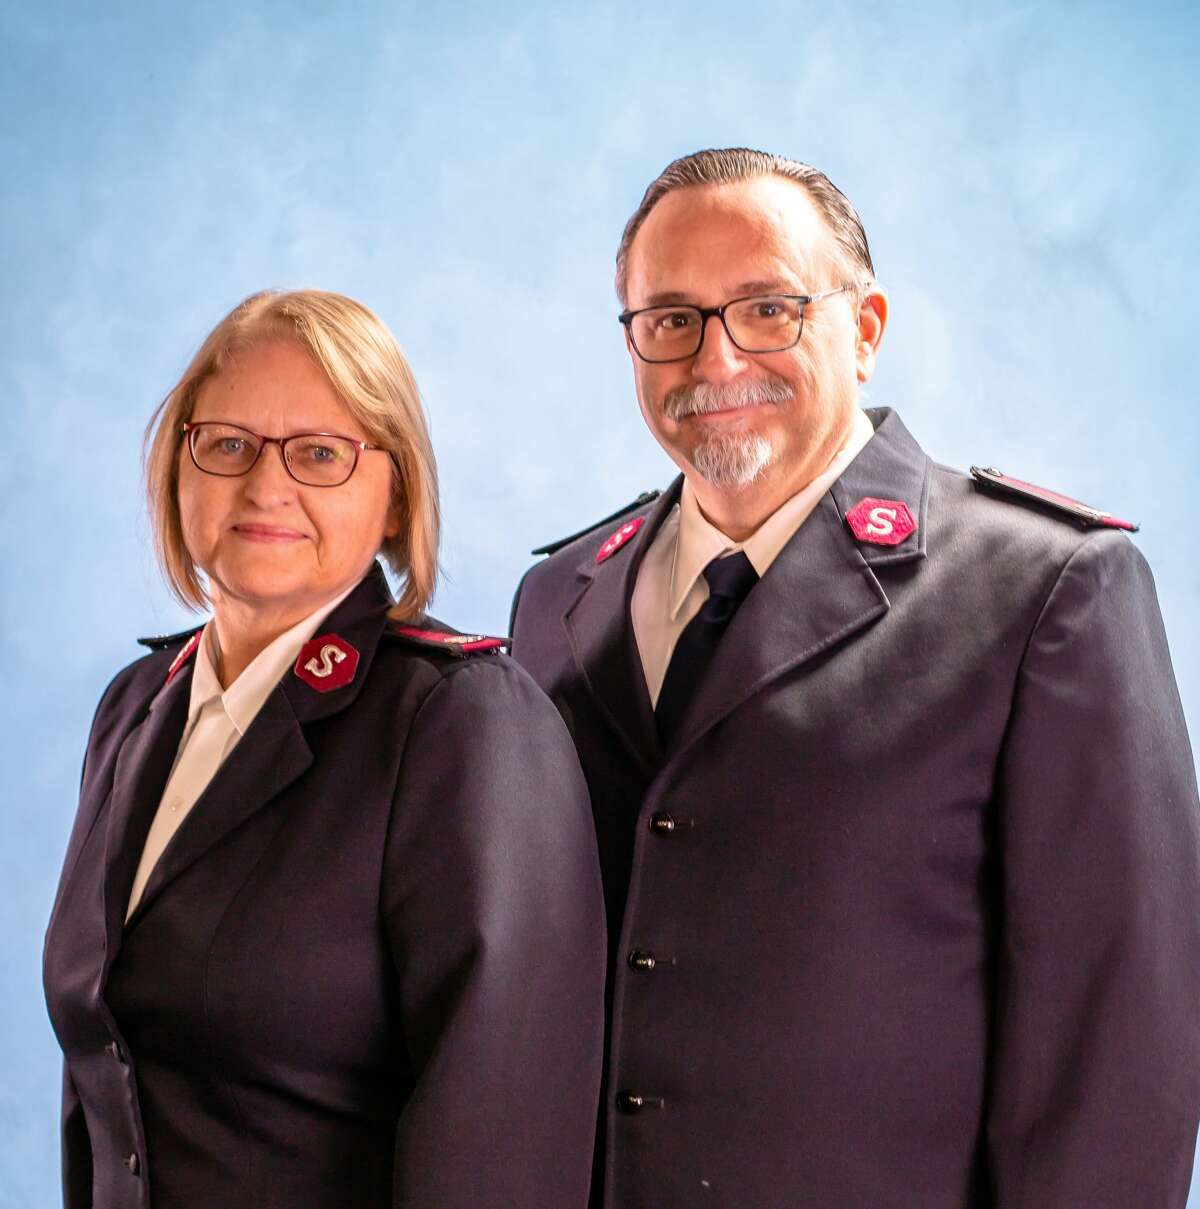 Major Brian Reed is the Corps Commanding Officer of the Midland Salvation Army church and community center, along with his wife, Major Heidi Reed. 